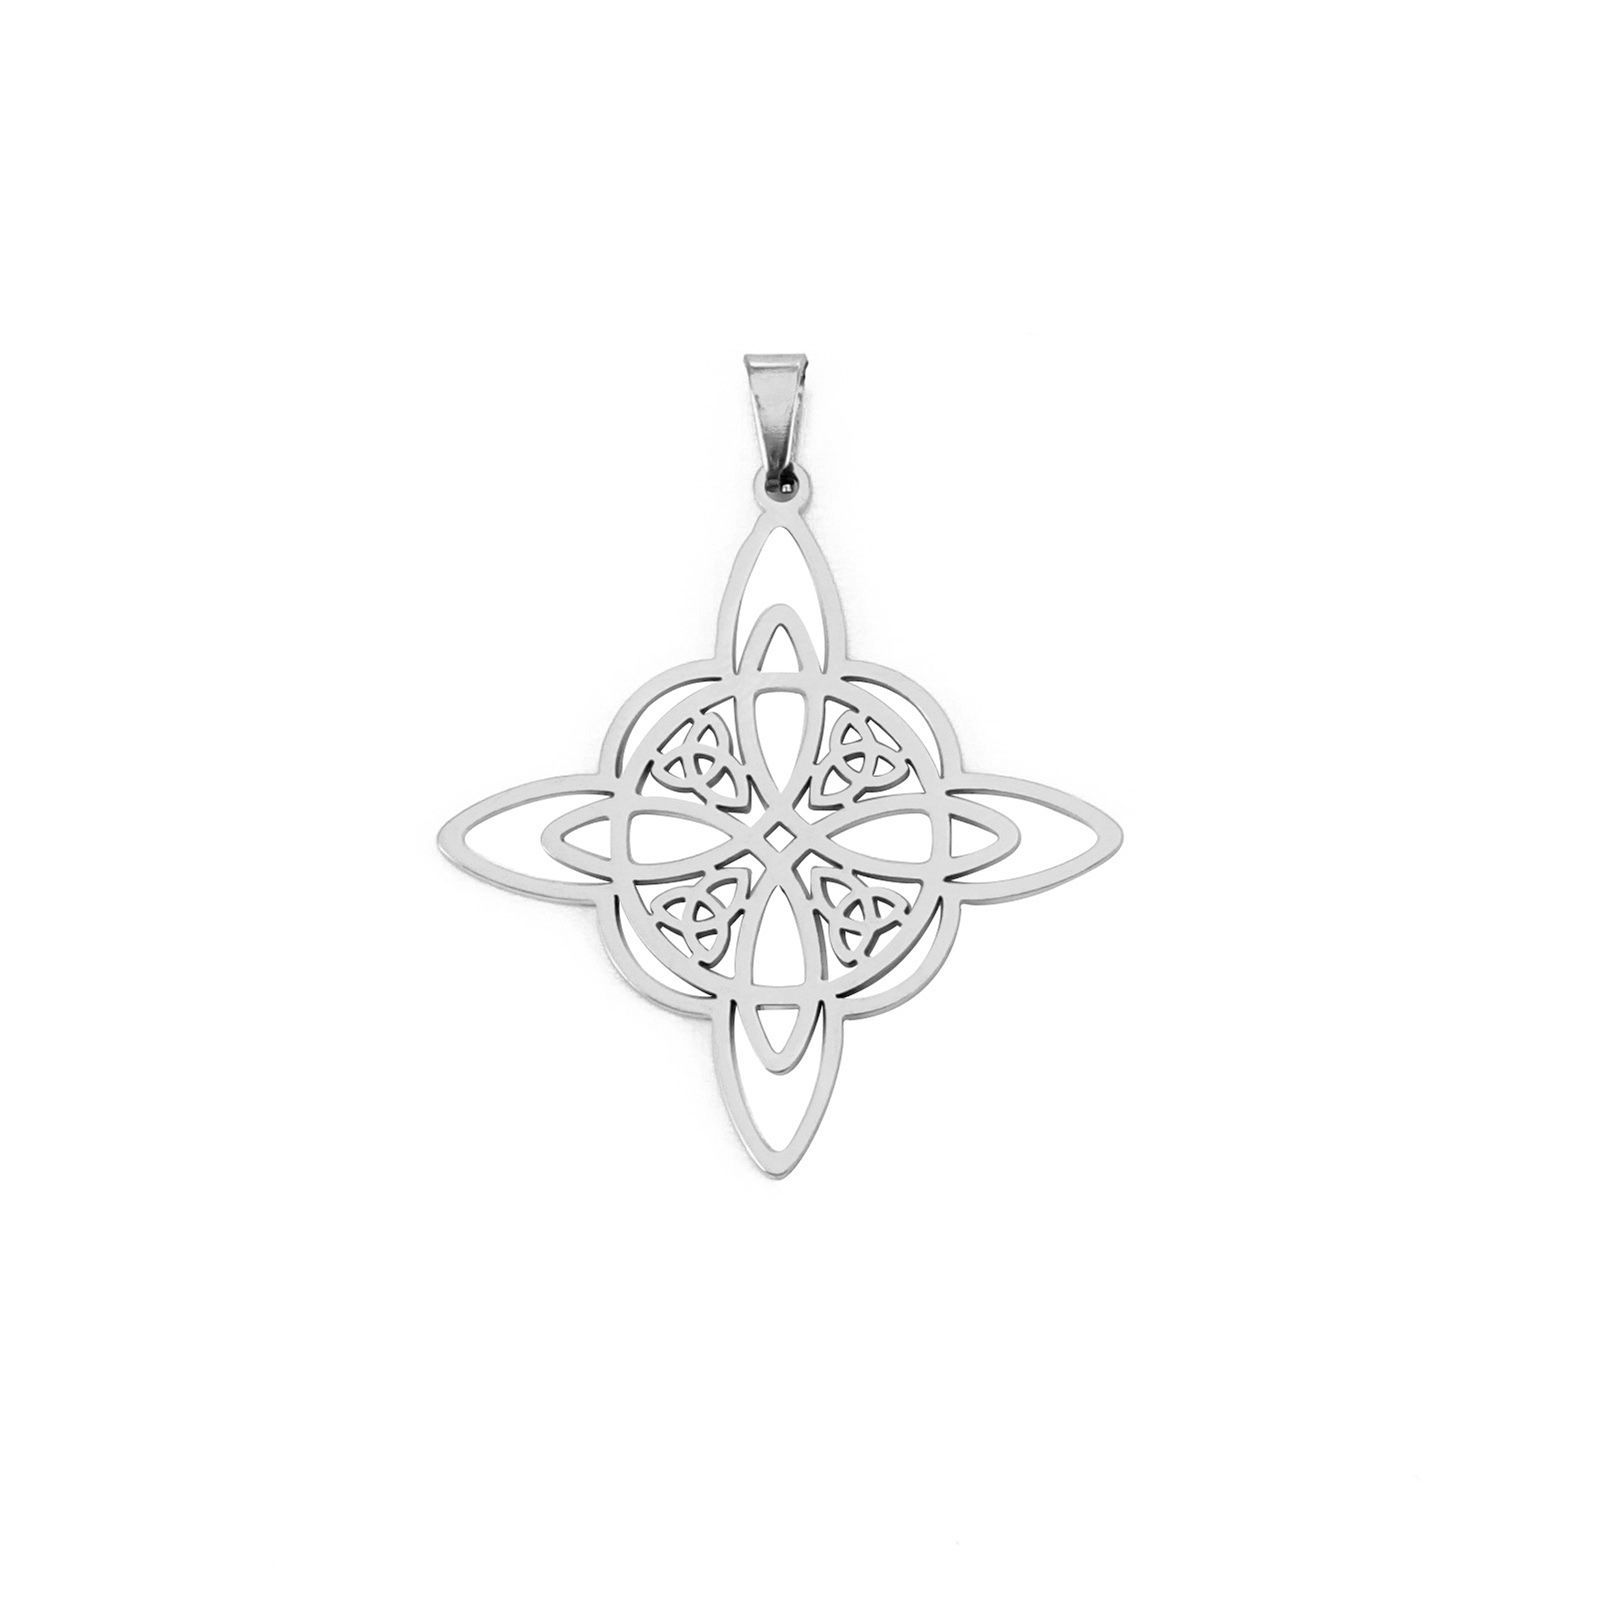 Picture of 304 Stainless Steel Pendants Silver Tone Celtic Knot 3.4cm x 3.65cm, 1 Piece